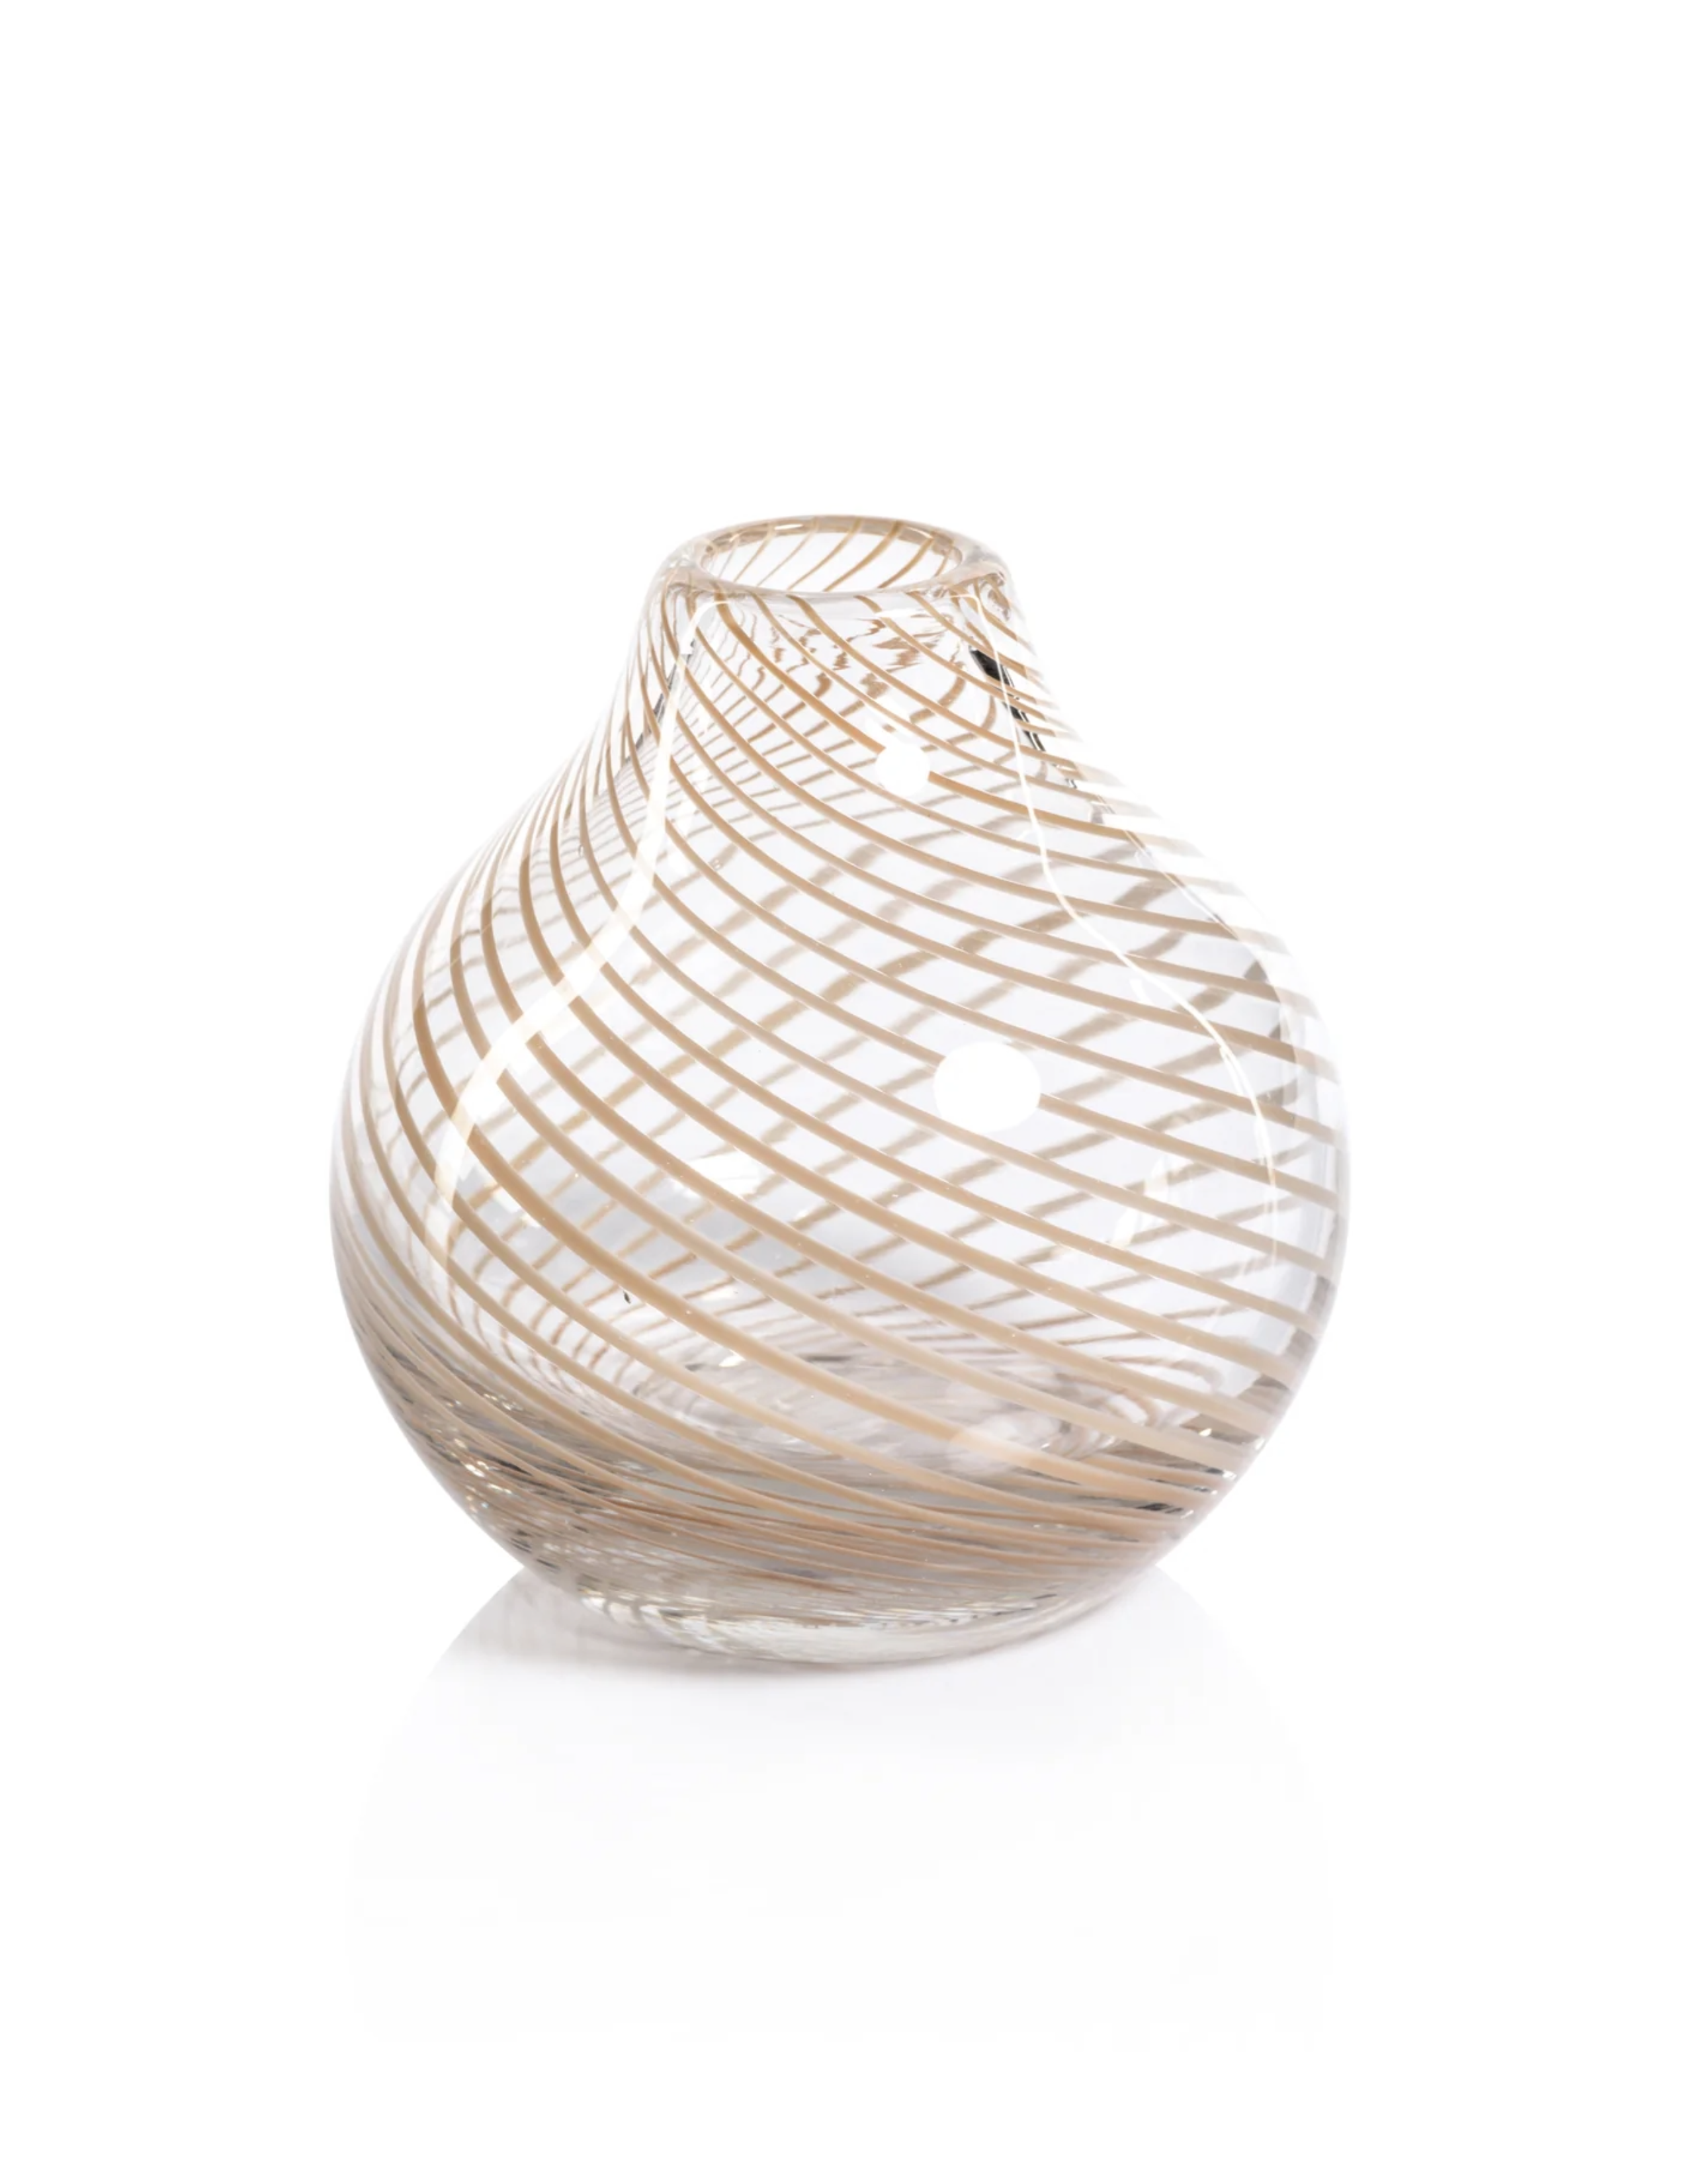 Claire Clear Bud Vase with Beige Swirl